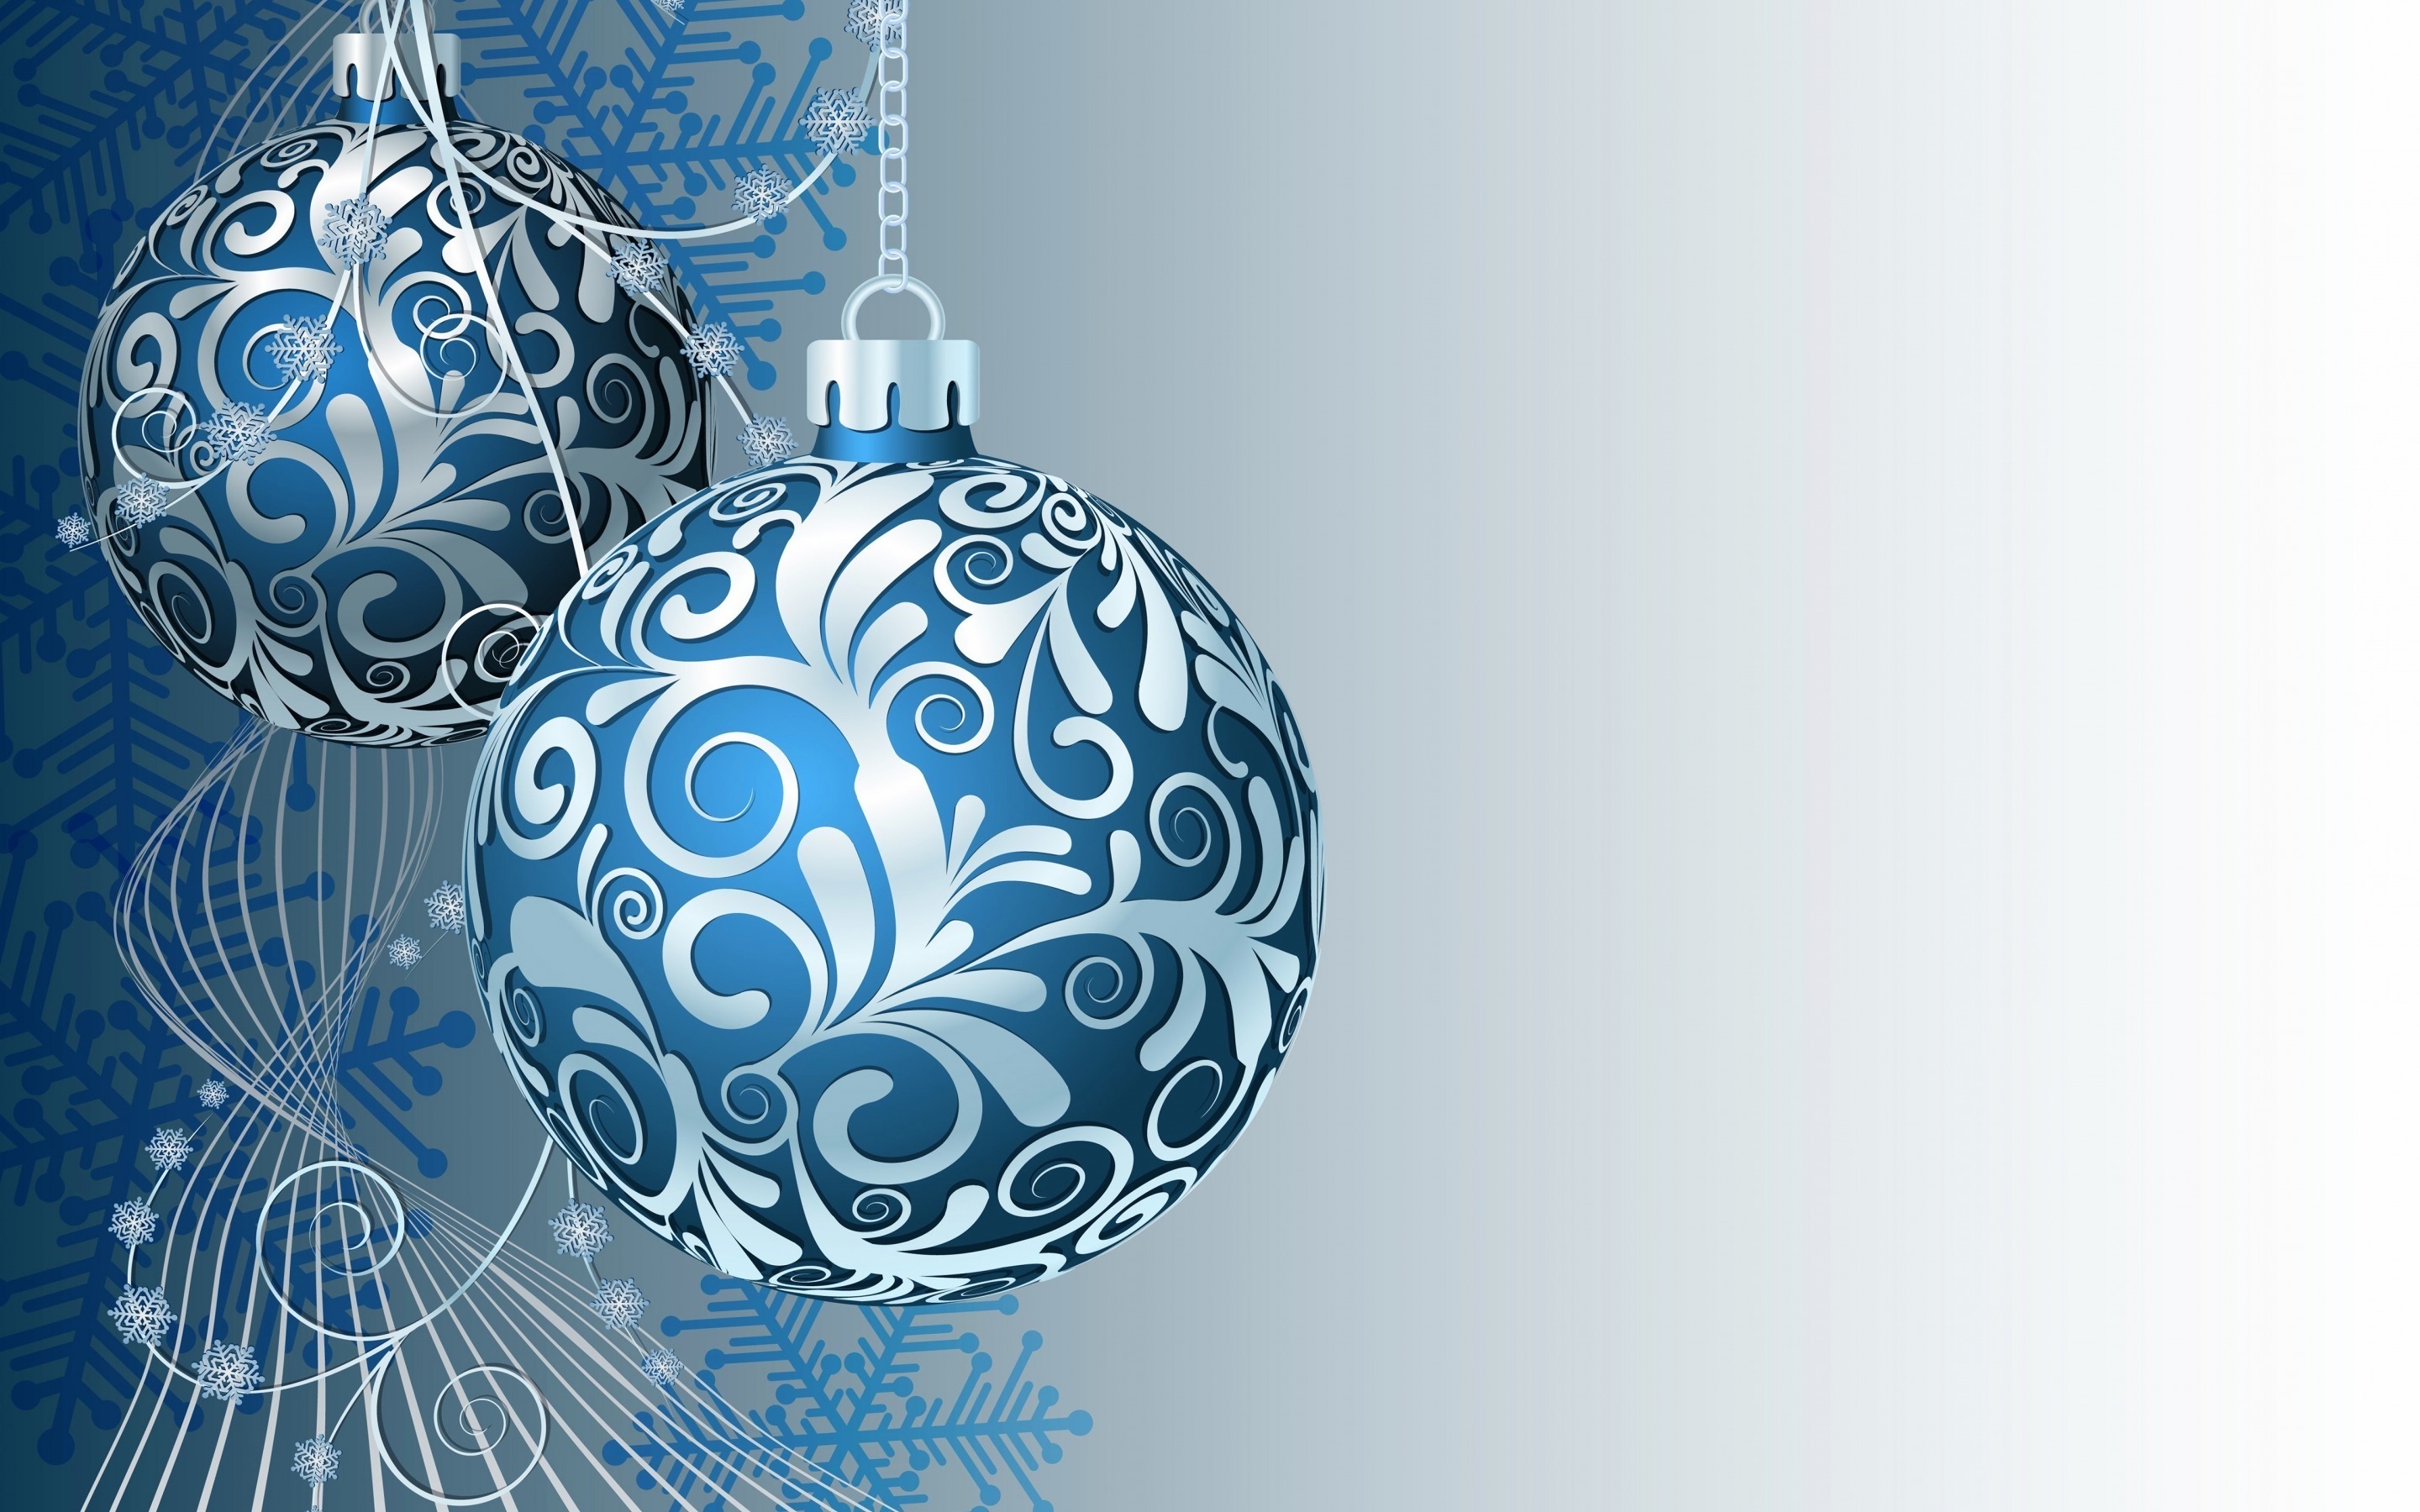 Gorgeous Ornaments for Christmas for 2880 x 1800 Retina Display resolution